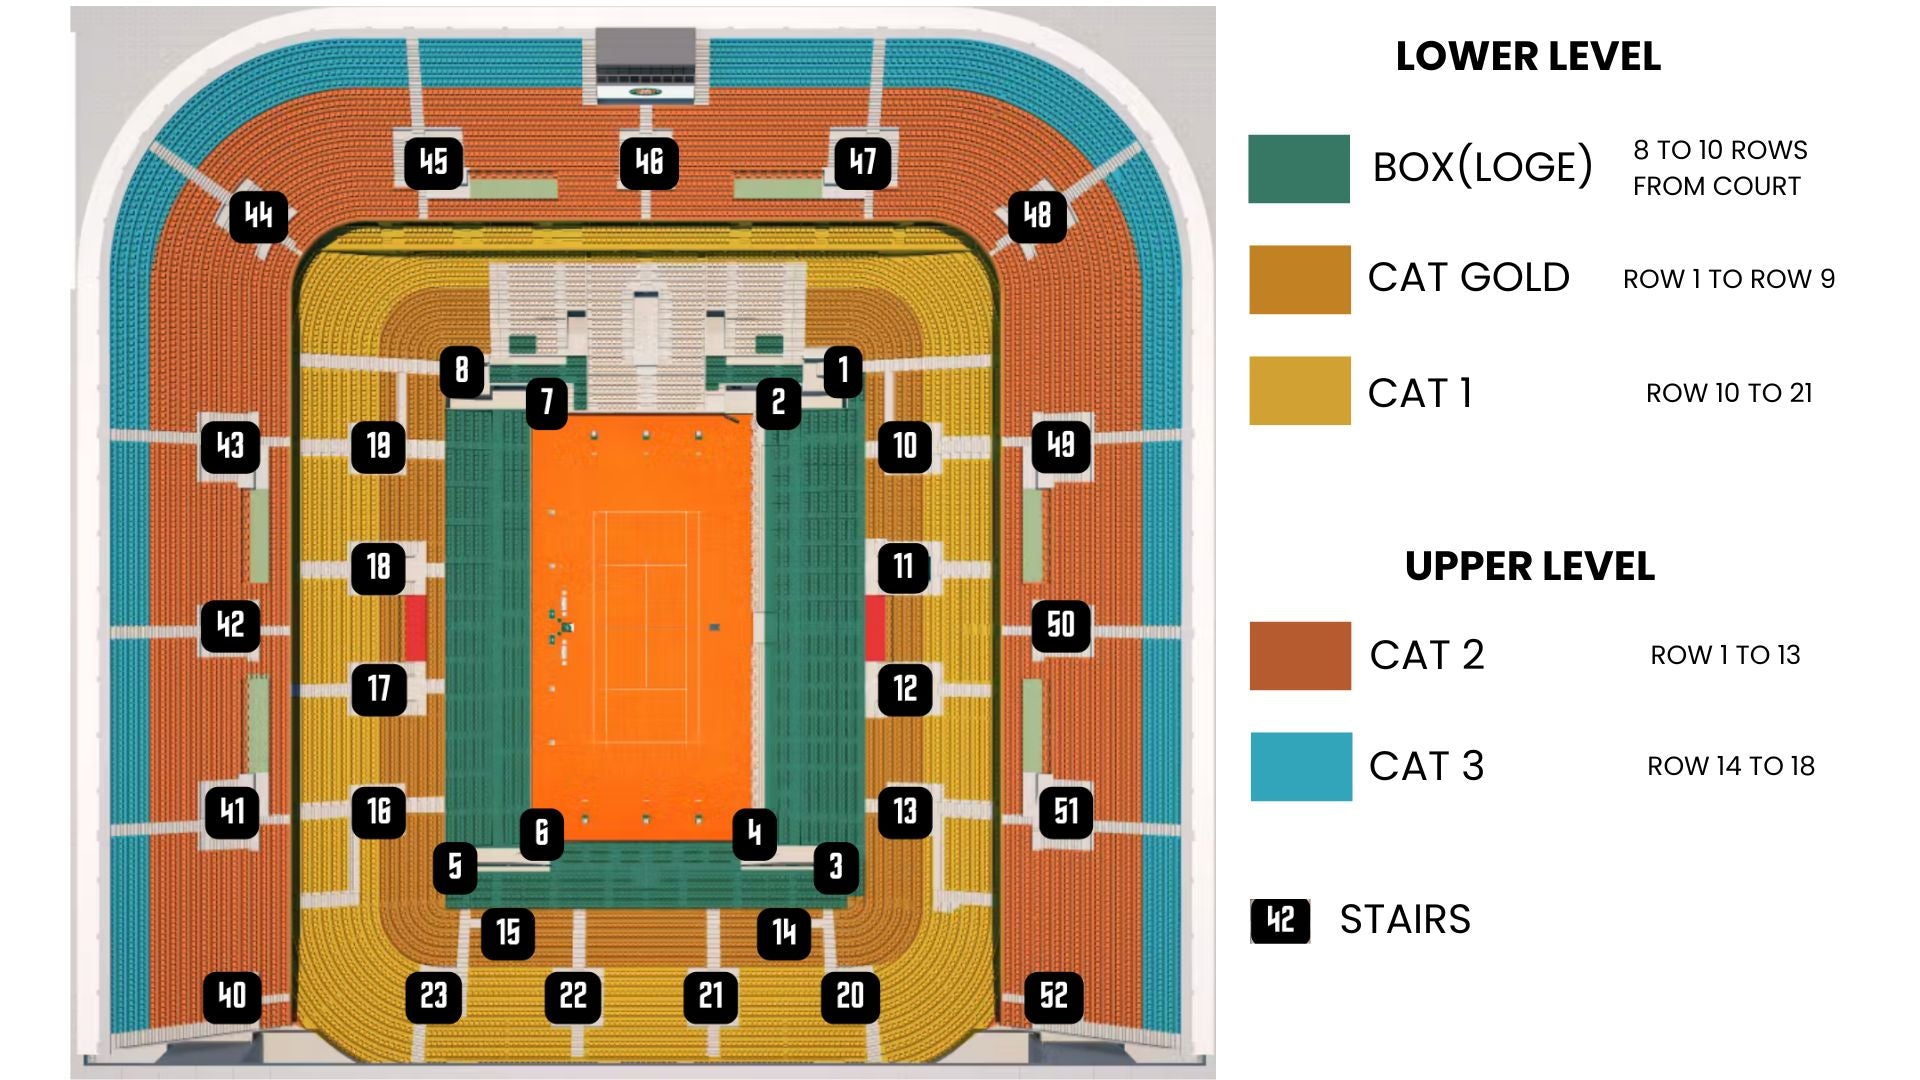 French Open Tickets 5/29/2024 - Wednesday Day Session - Philippe Chatrier (Center Court)